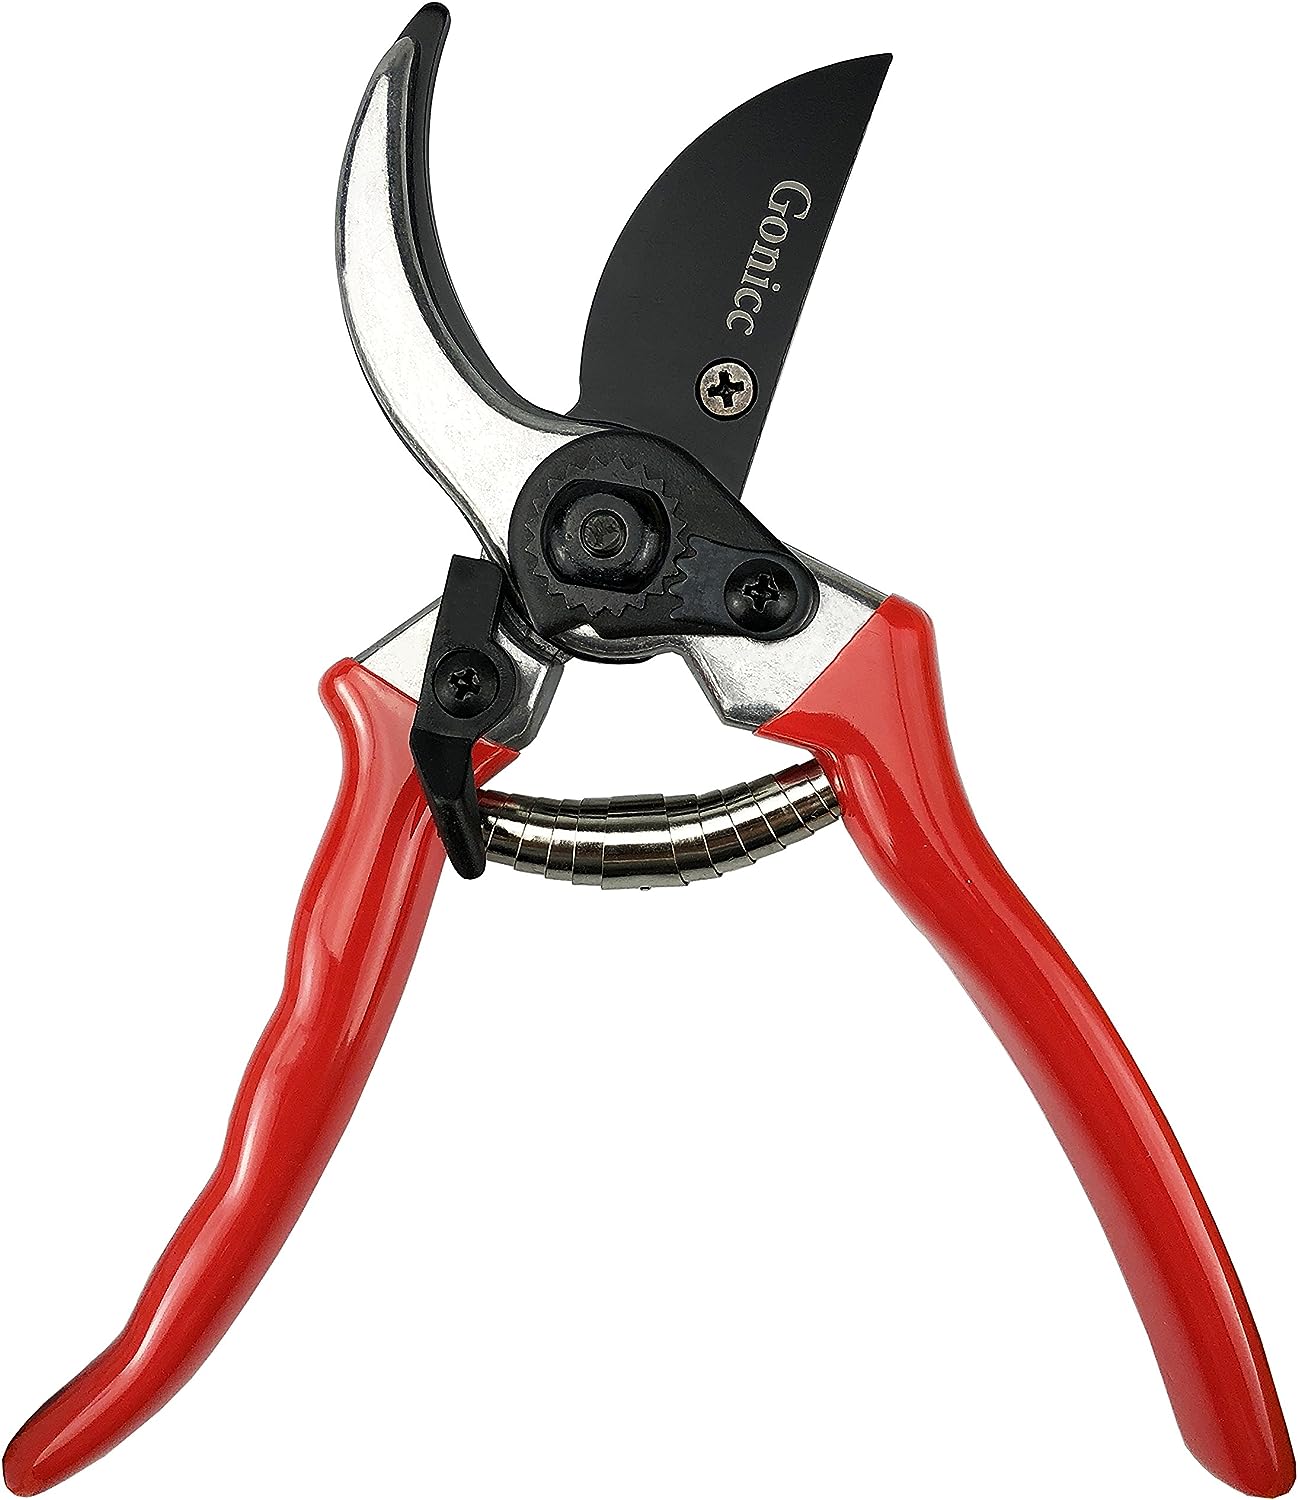 Gonicc 8" Professional Sharp Bypass Pruning Shears (GPPS-1002), Tree Trimmers Secateurs,Hand Pruner, Garden Shears,Clippers For The Garden, Bonsai Cutters, Loppers